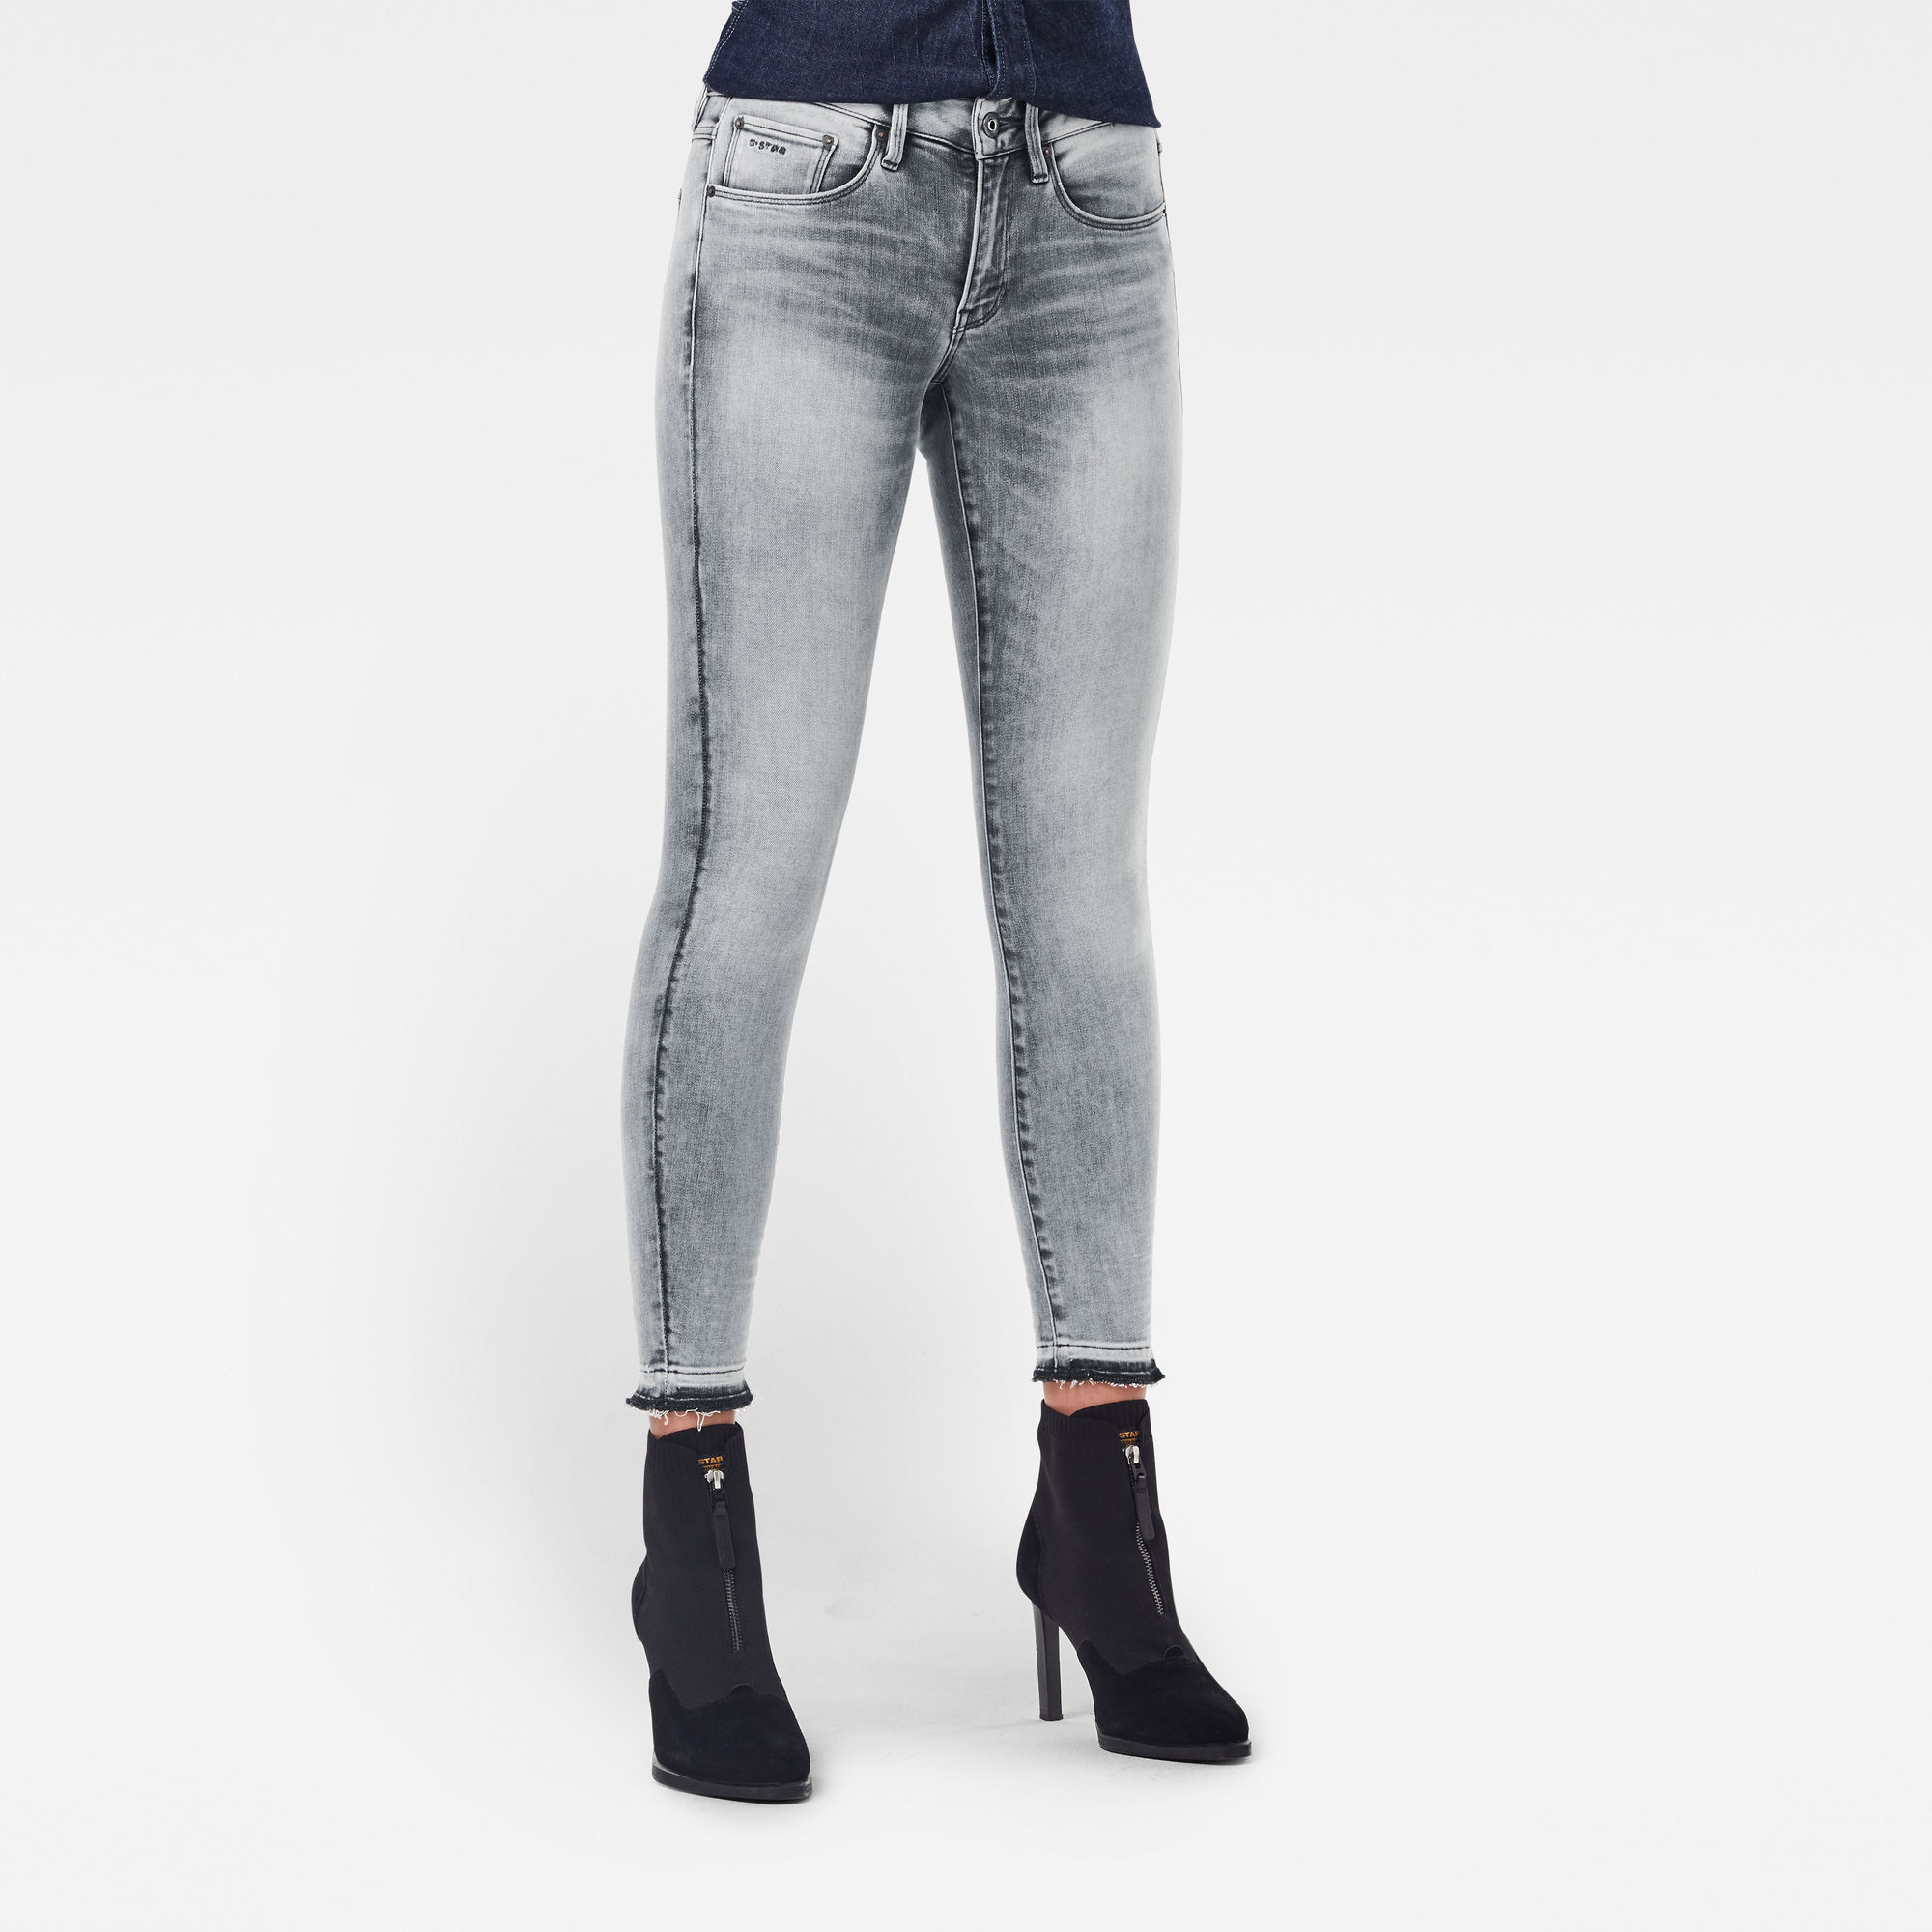 G-Star RAW Femmes Jean 3301 Mid Skinny Ripped Edge Ankle Gris